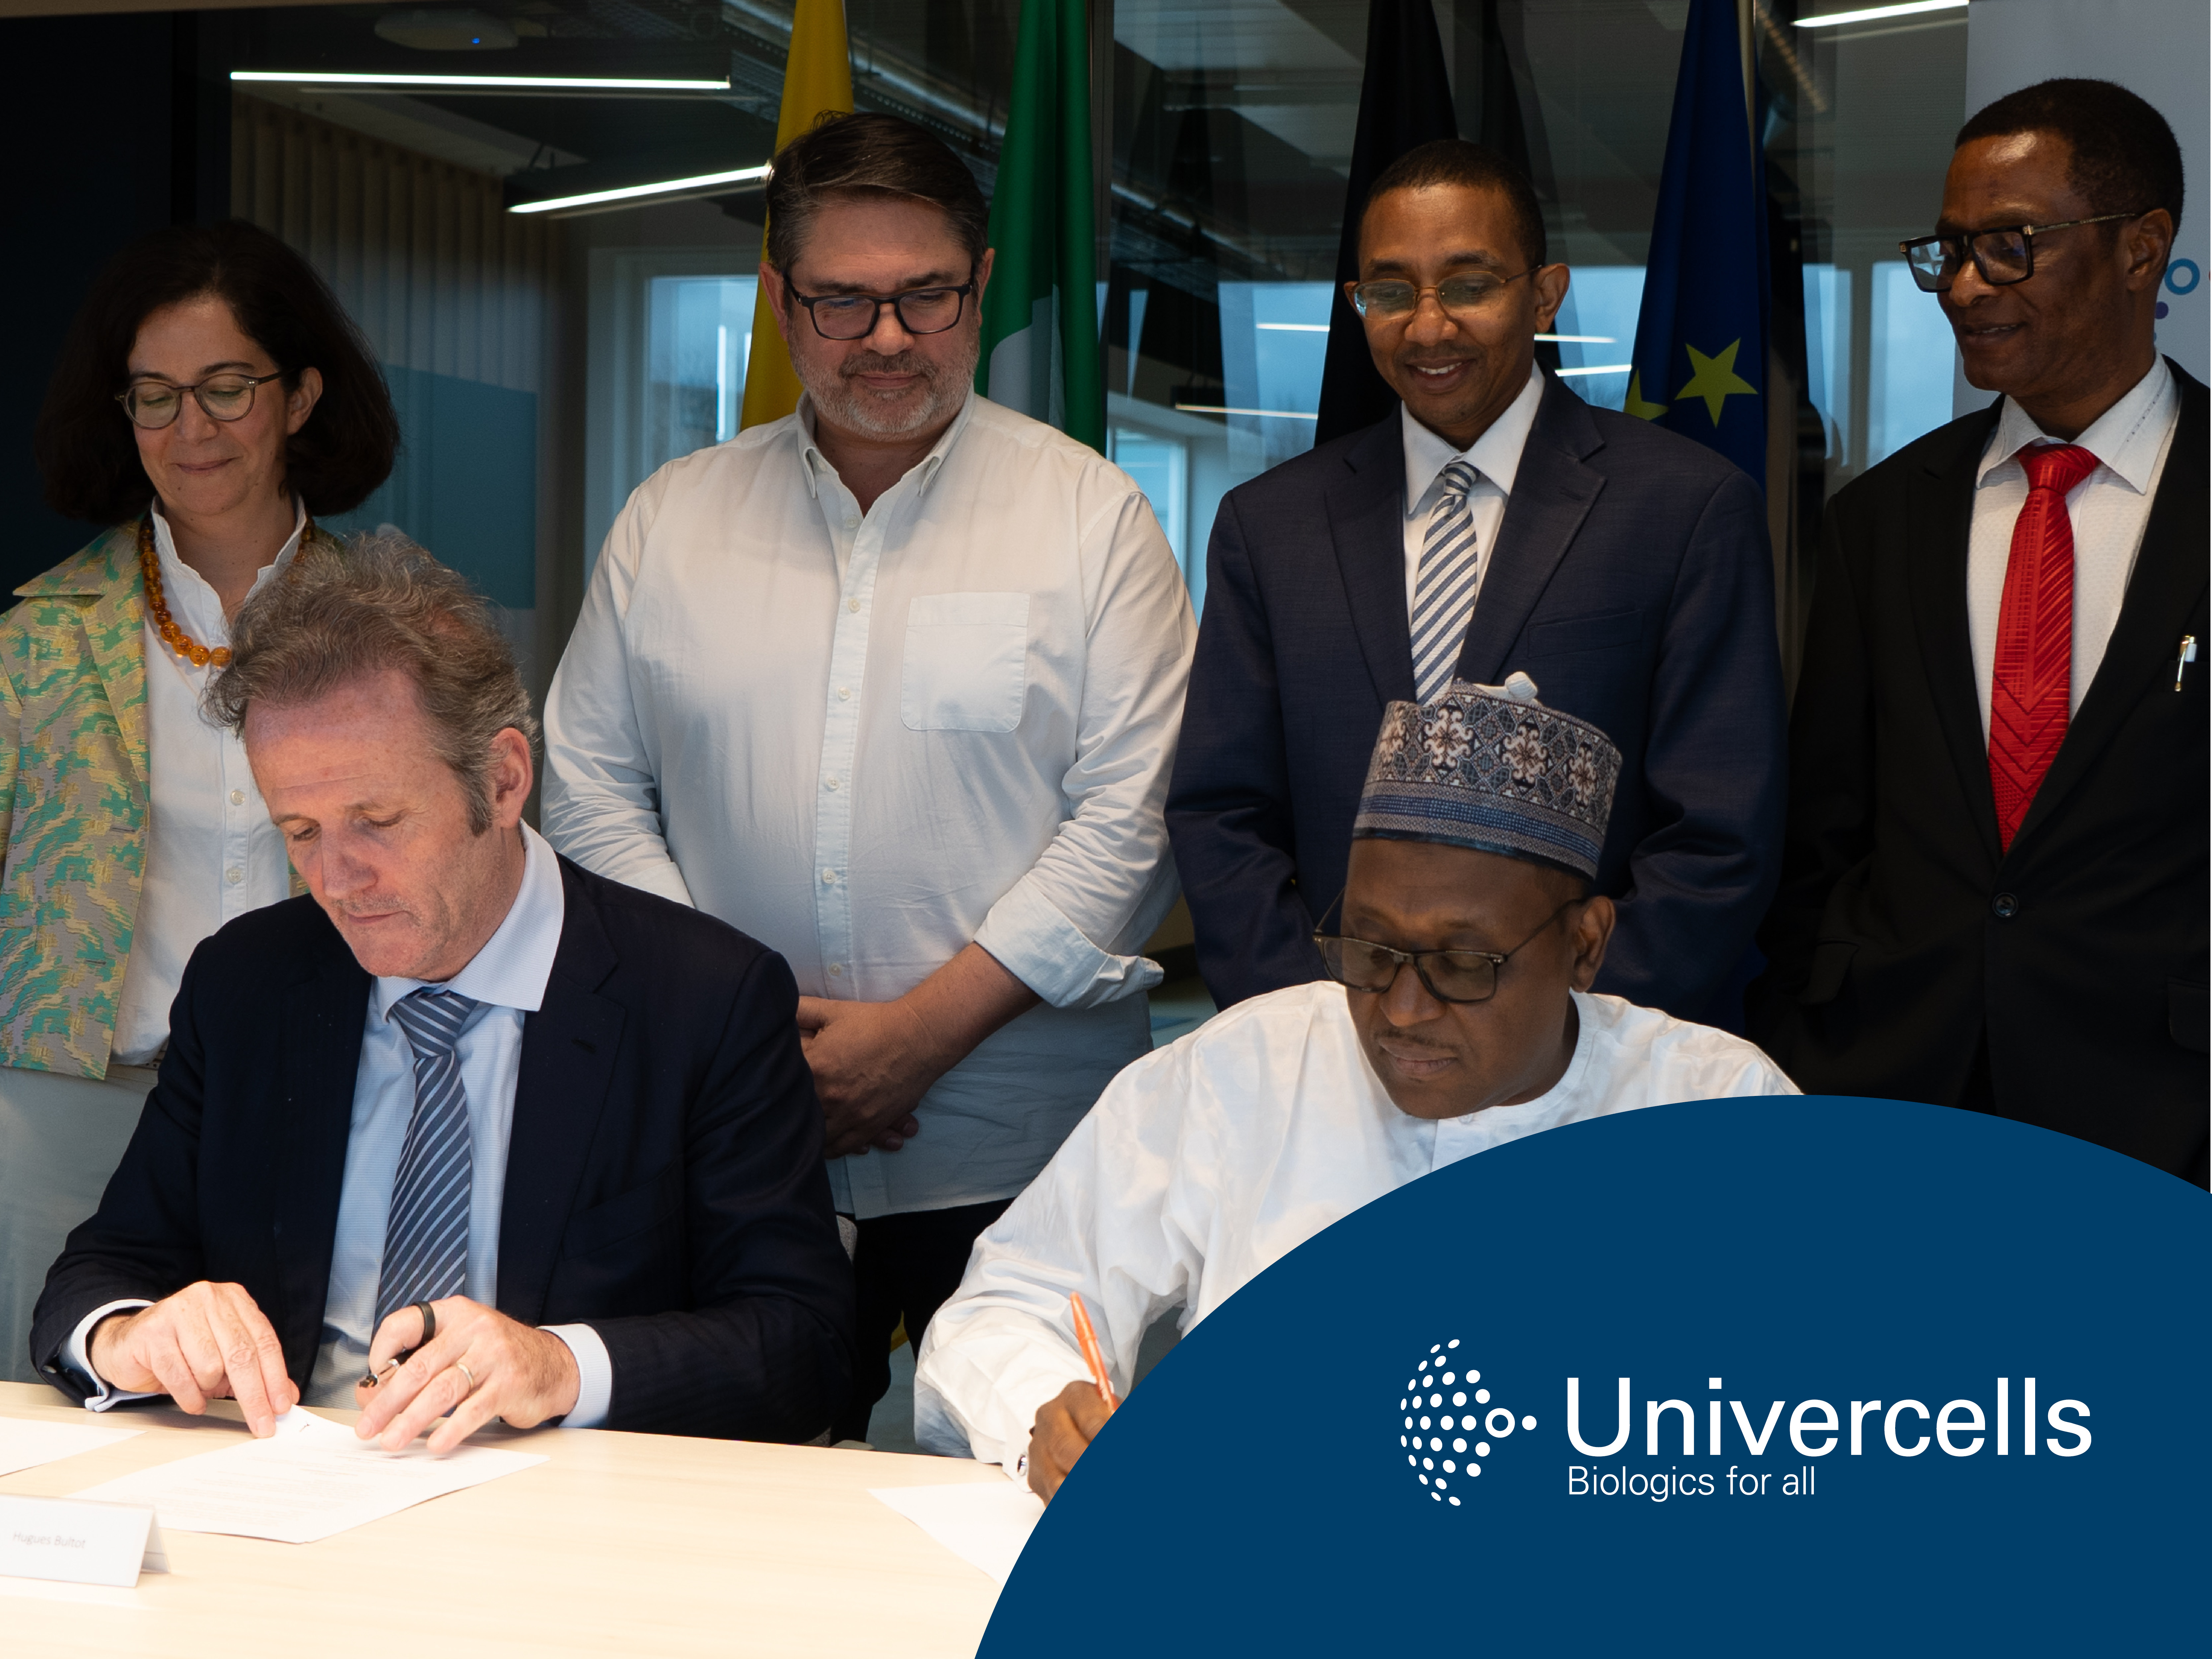 Press Release: Univercells and the Government of the Federal Republic of Nigeria signed a MoU focusing on building a thriving biopharmaceutical ecosystem in Nigeria and upskilling its workforce to increase local manufacturing.